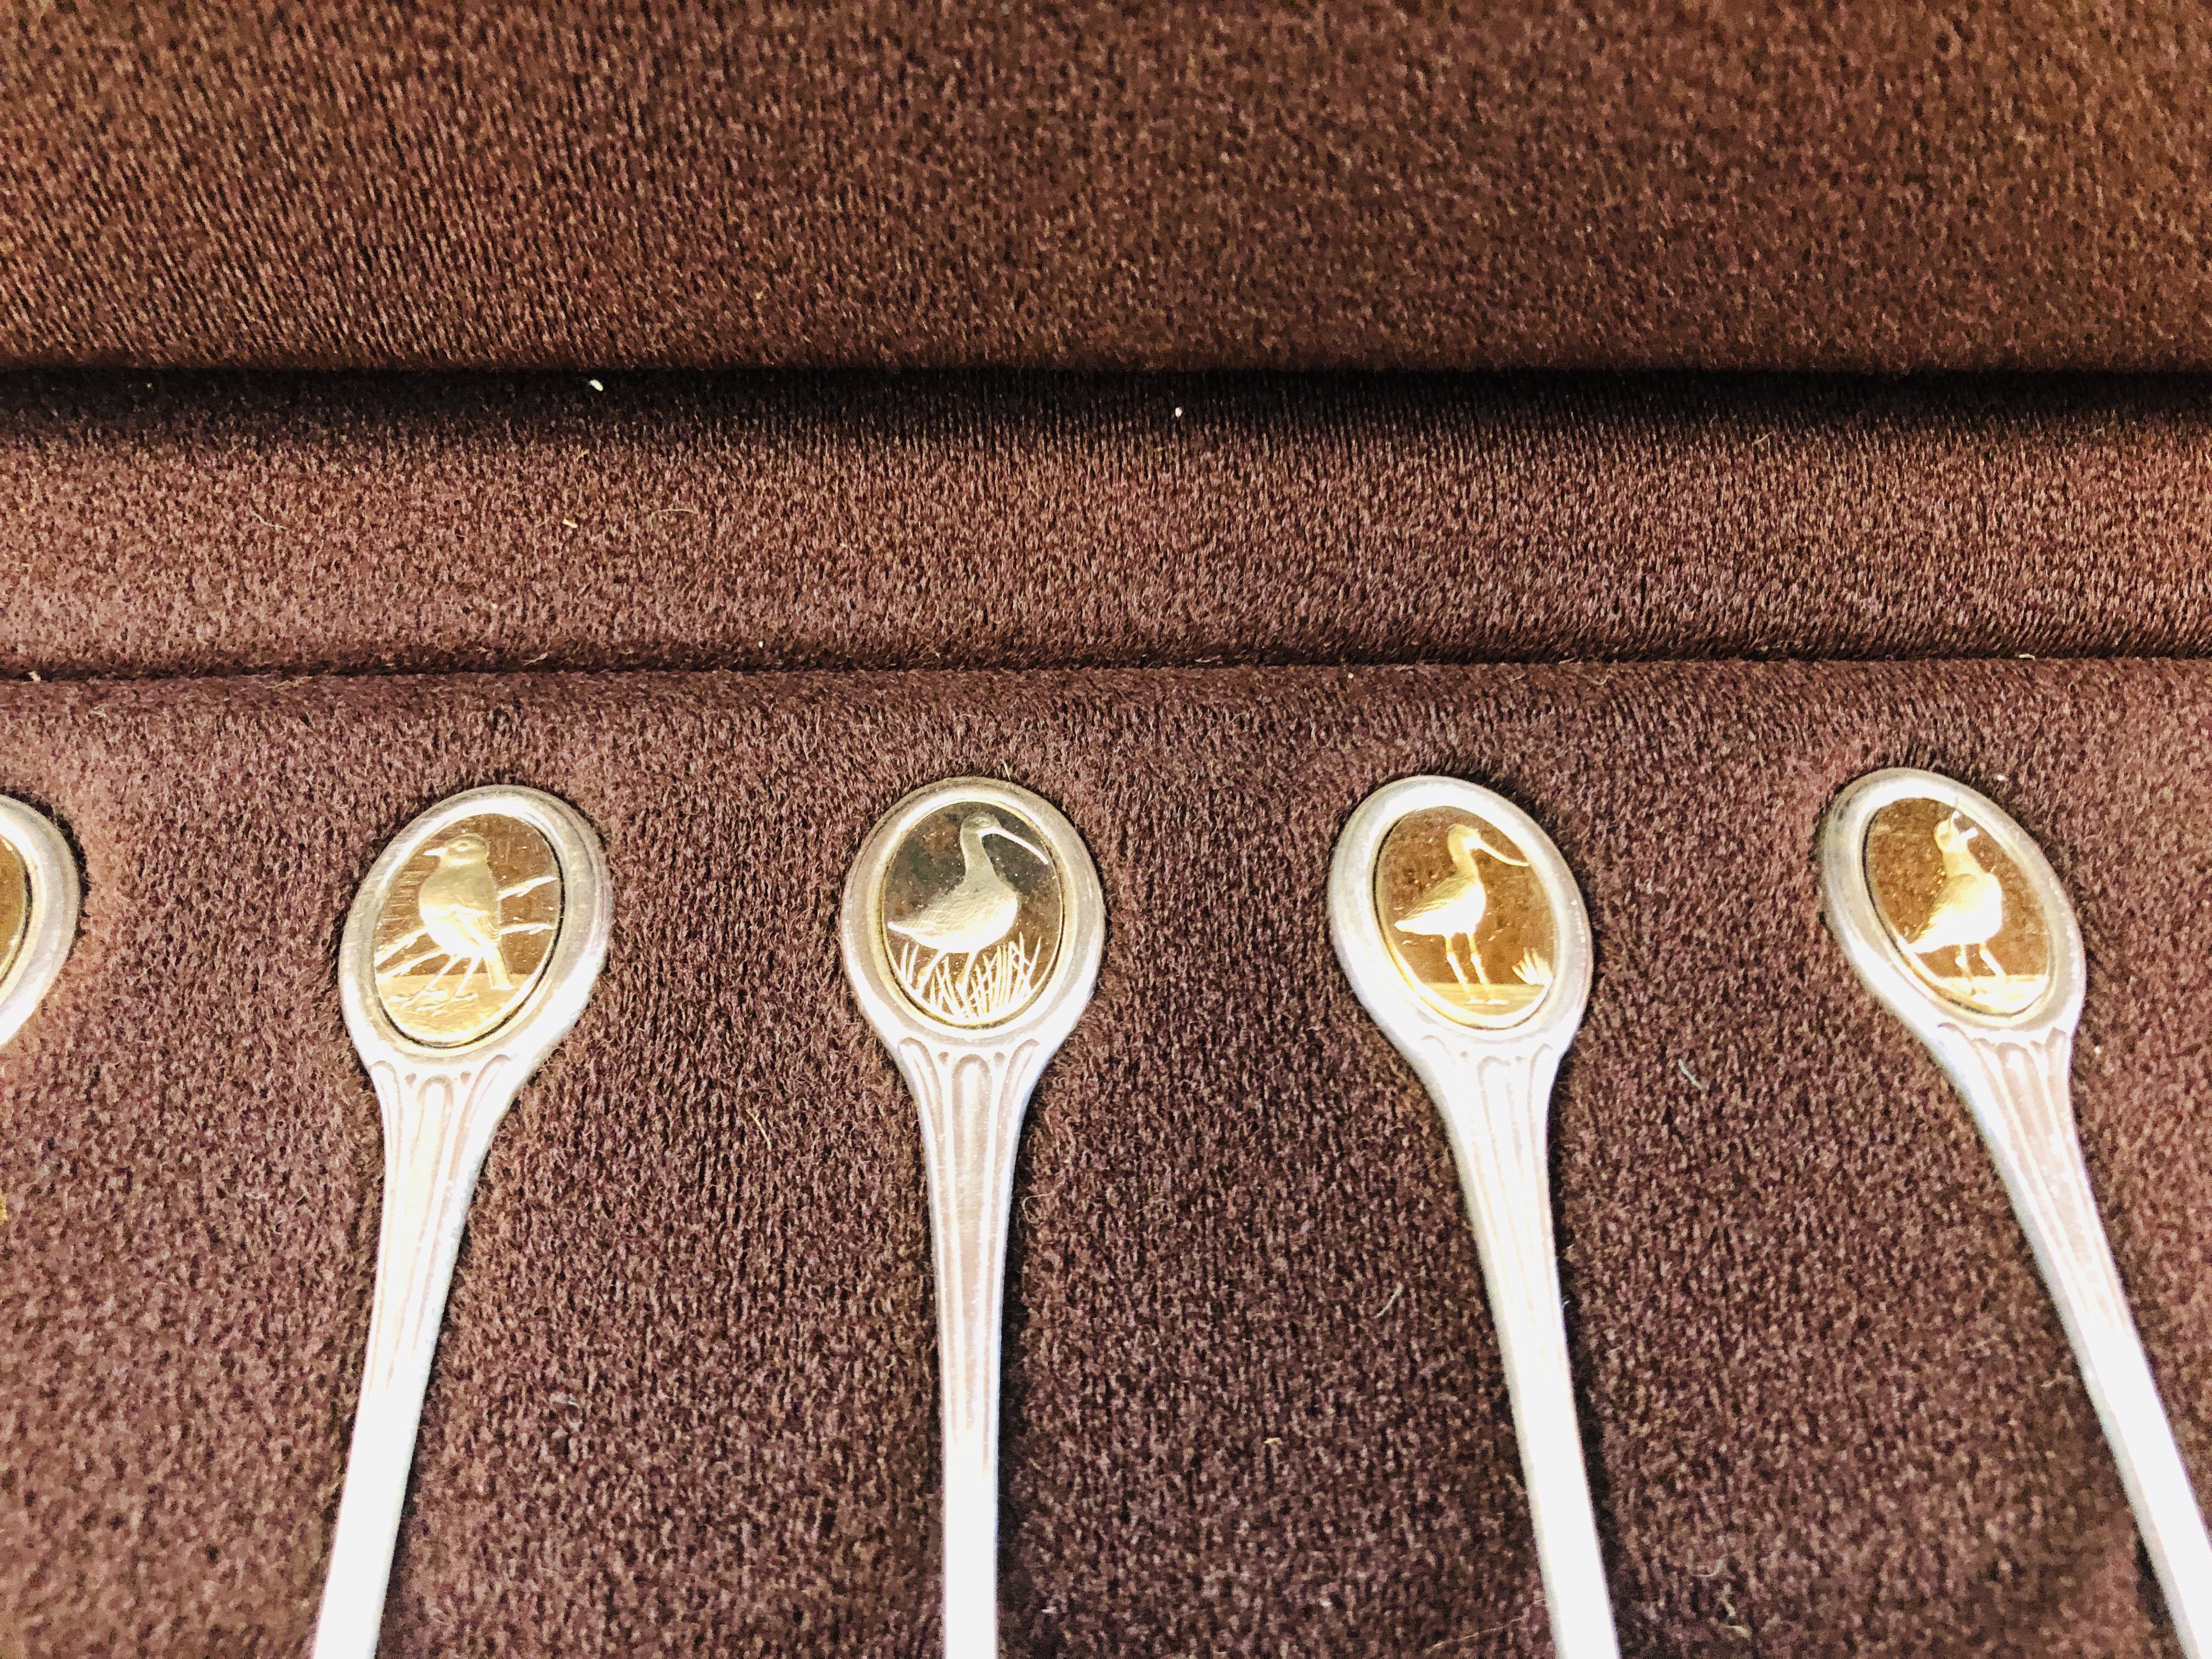 AN RSPB SILVER SPOON COLLECTION, J PINCHES LON 1975, 12 SPOONS. - Image 6 of 11